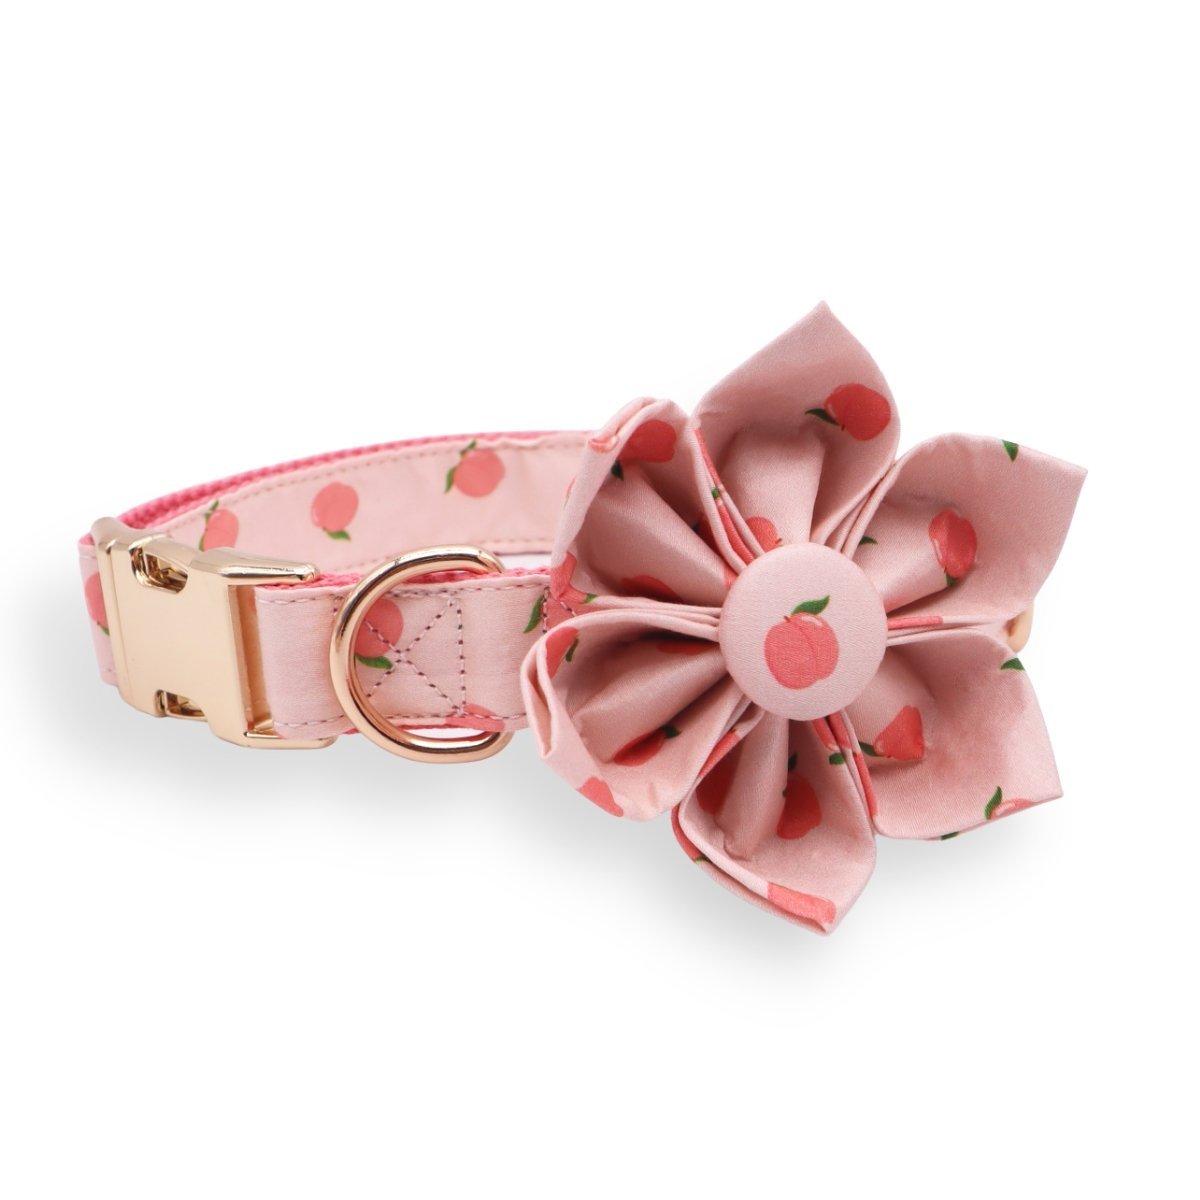 Cute & Super Safe Hardware Buckle Collar with Adorable Detachable Bows.  Beautiful Bowties Designs – Sniff & Bark